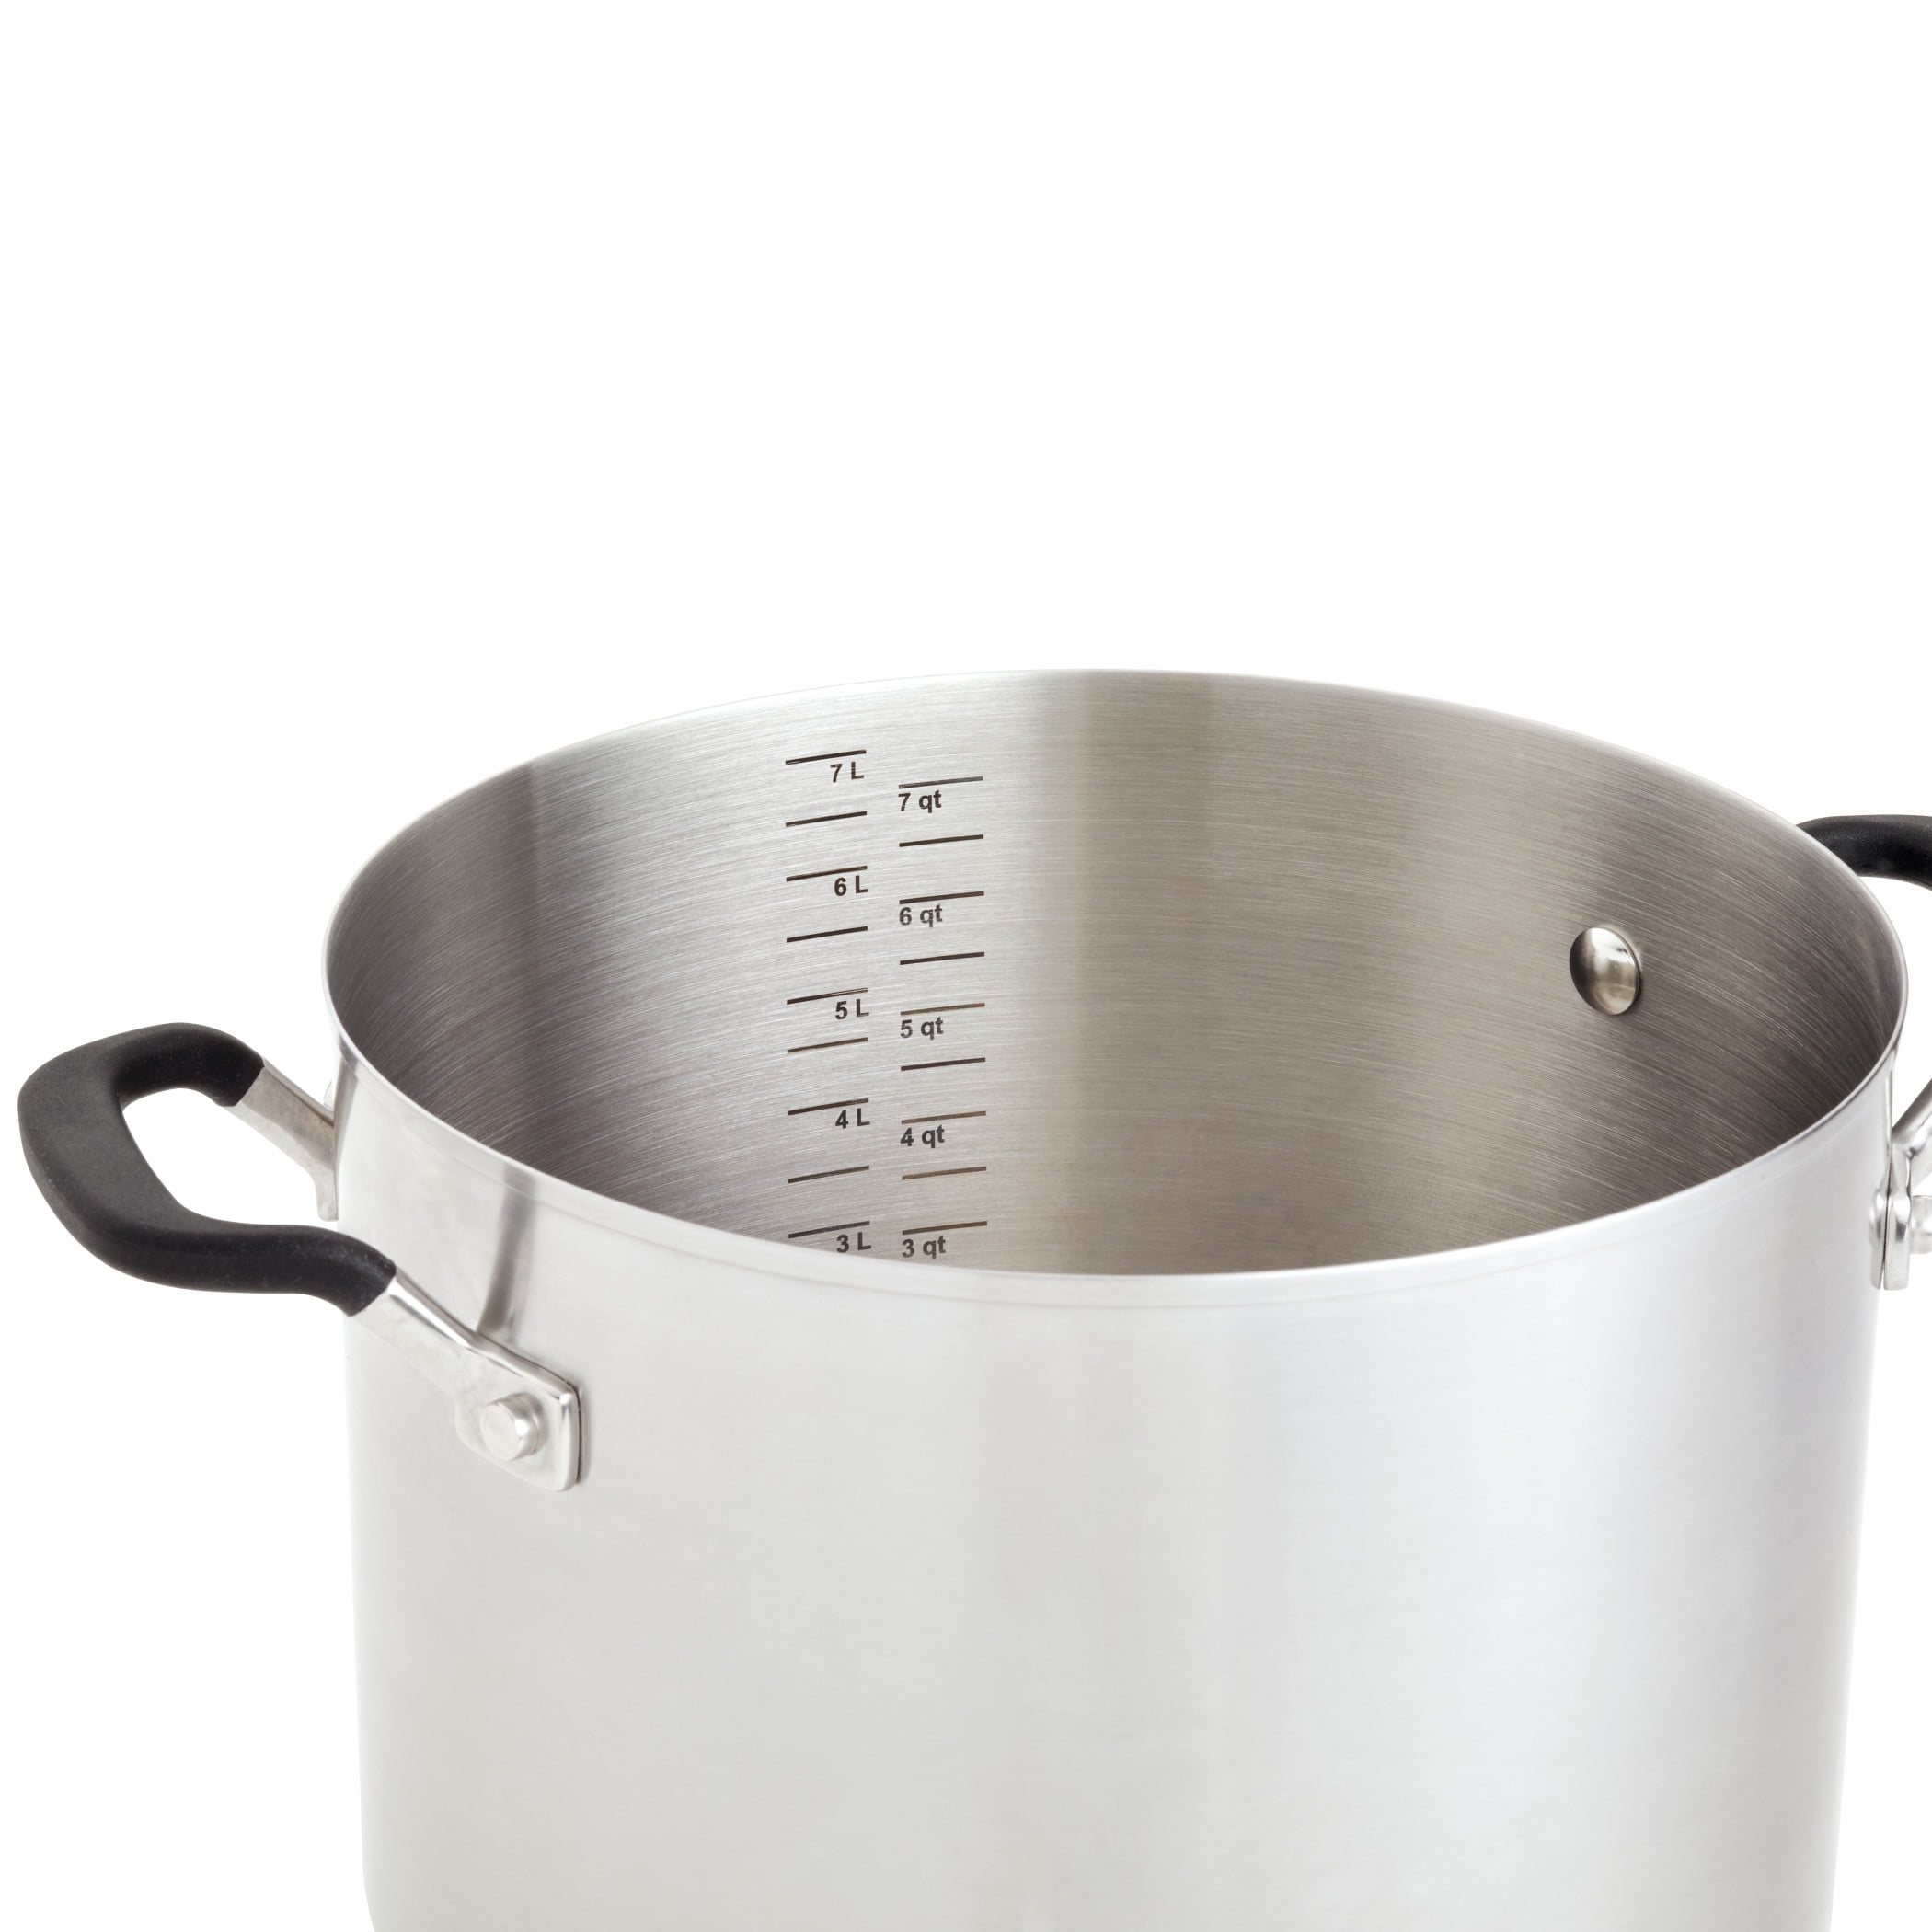 KitchenAid 5-Ply Clad Stainless Steel Cookware Pots and Pans Set, 10 Piece,  Polished Stainless